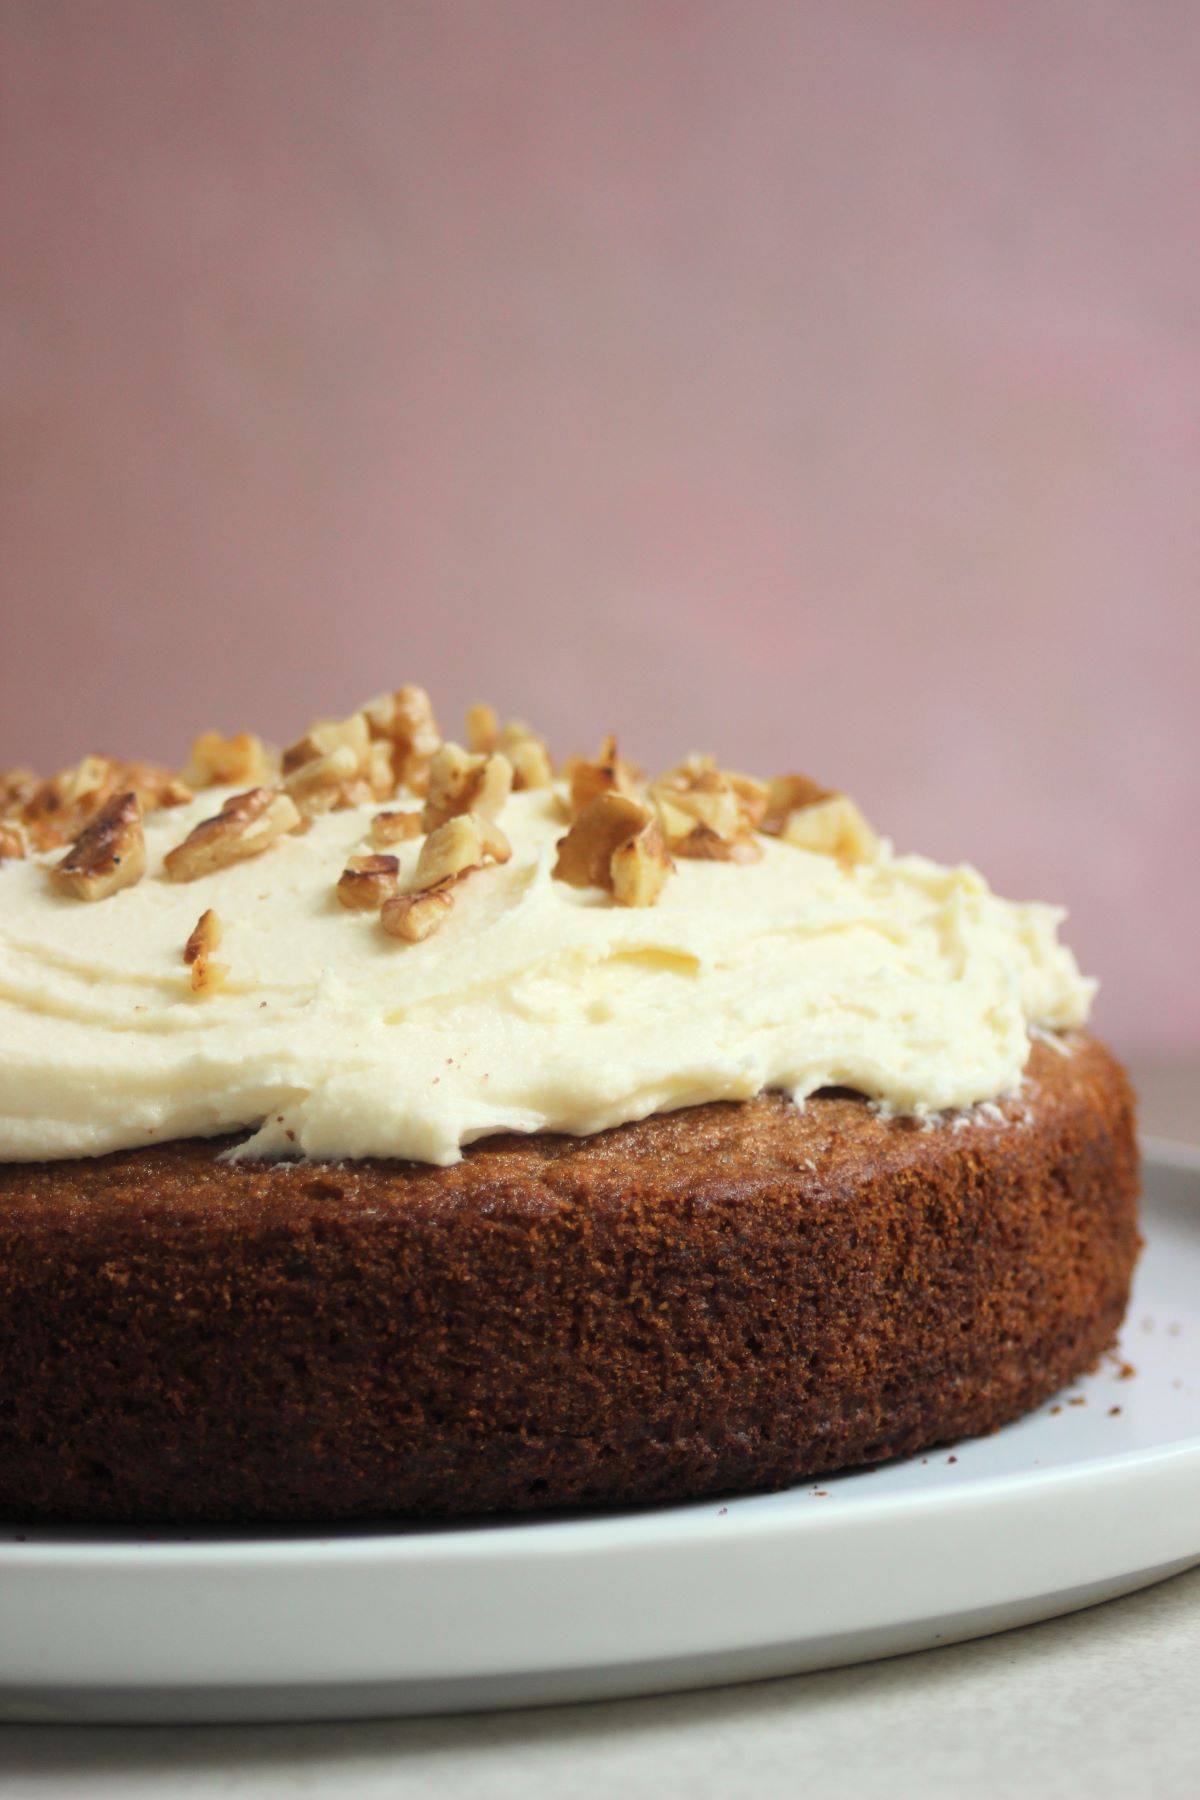 Sweet potato cake with cream cheese frosting and chopped nuts front view on a white plate.